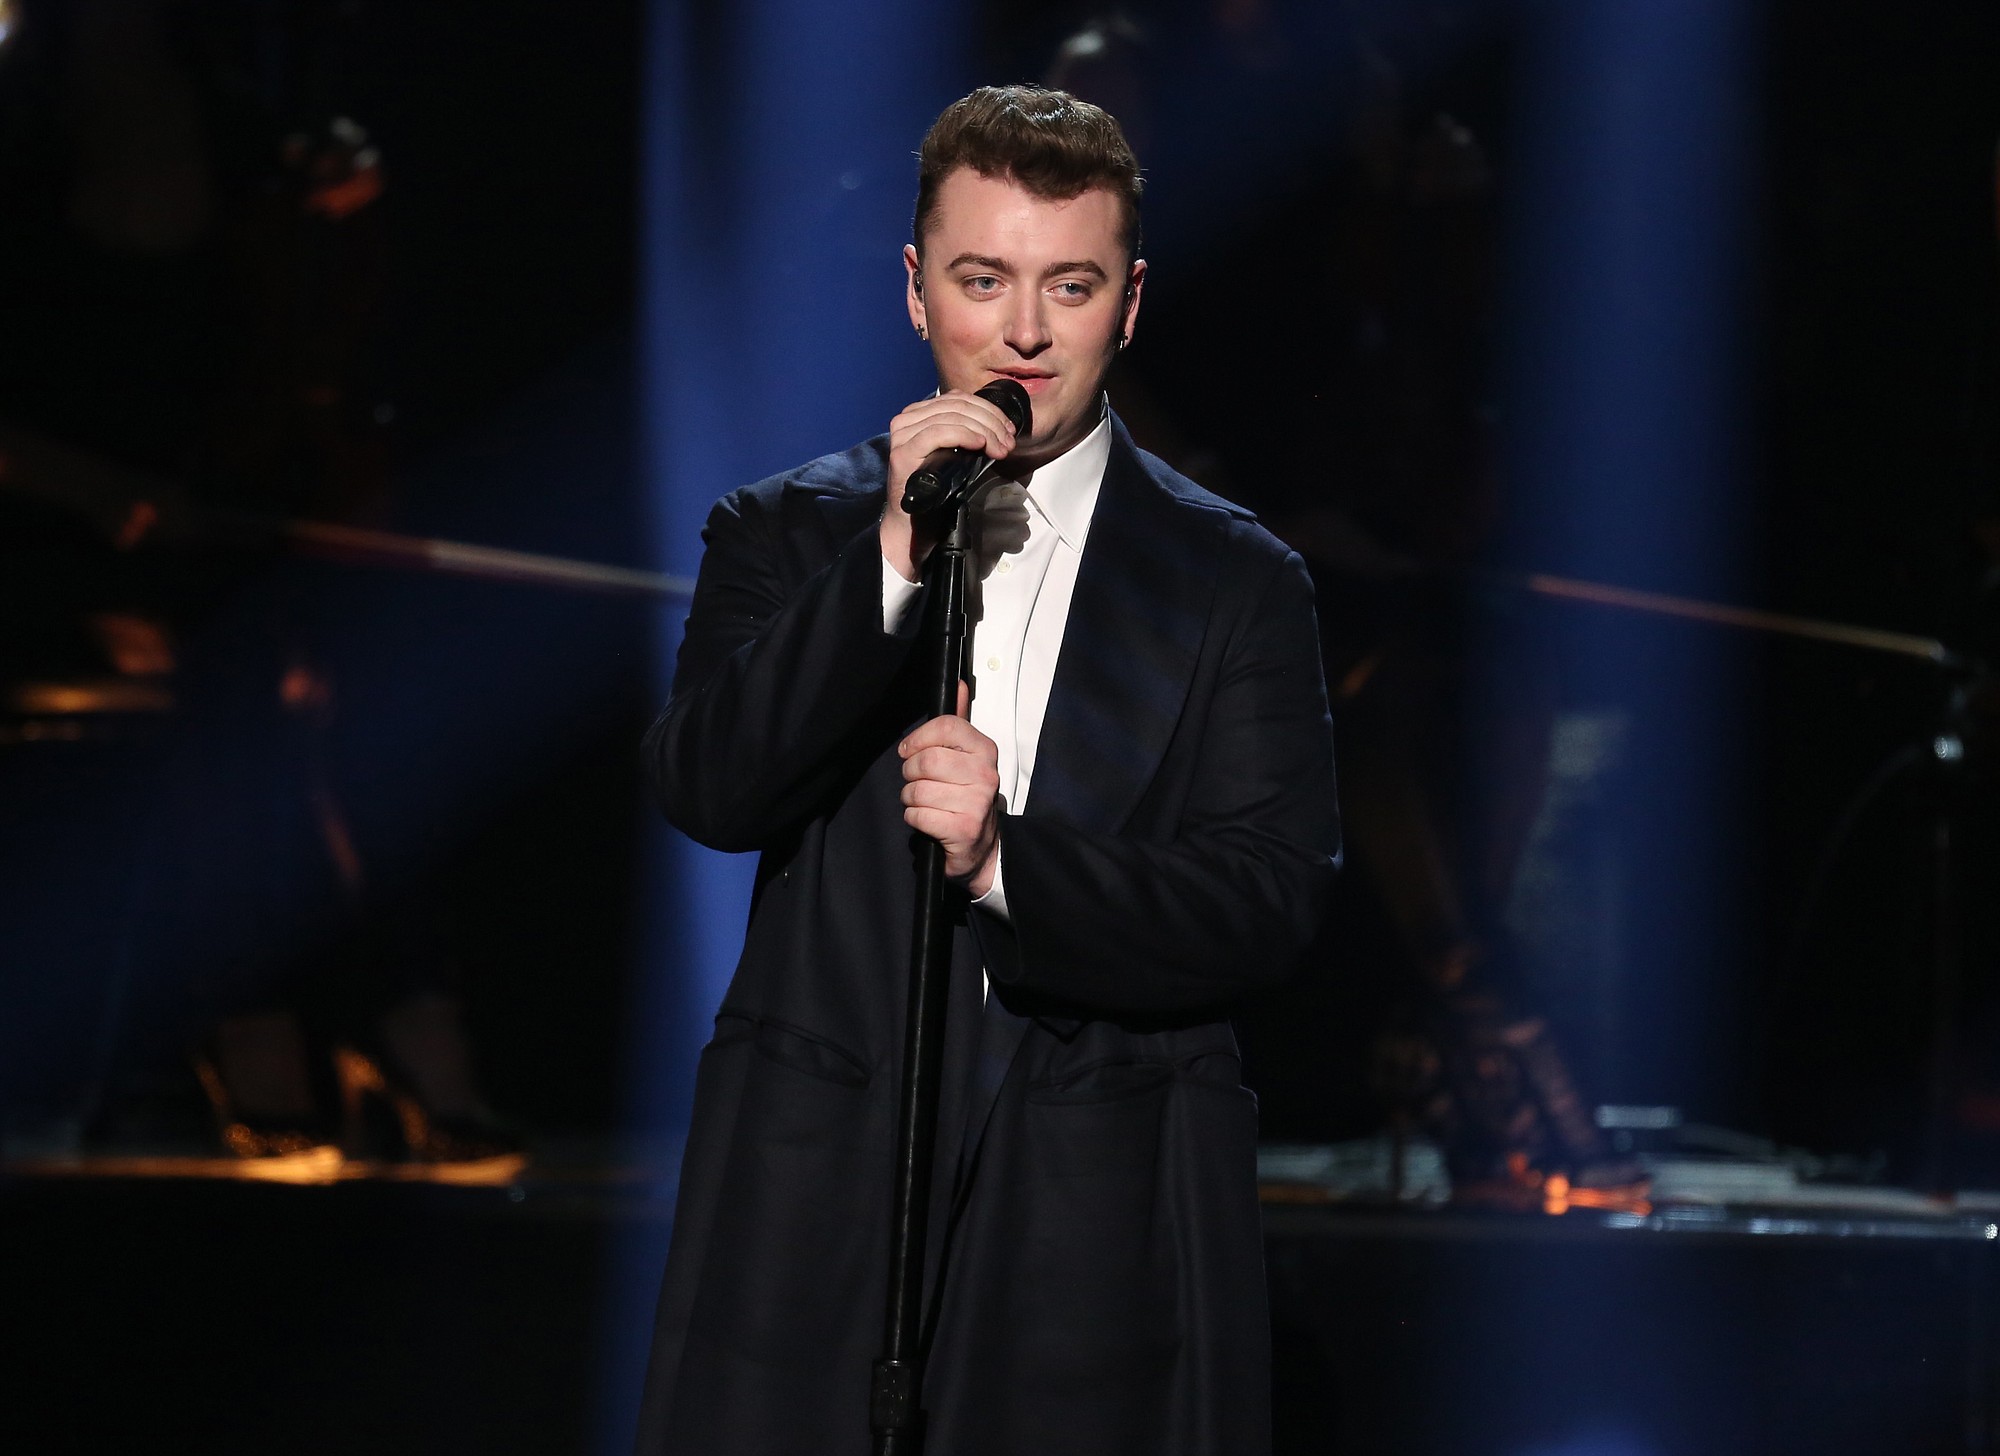 Sam Smith performs on stage Nov. 23 at the 42nd annual American Music Awards at Nokia Theatre L.A. Live in Los Angeles.